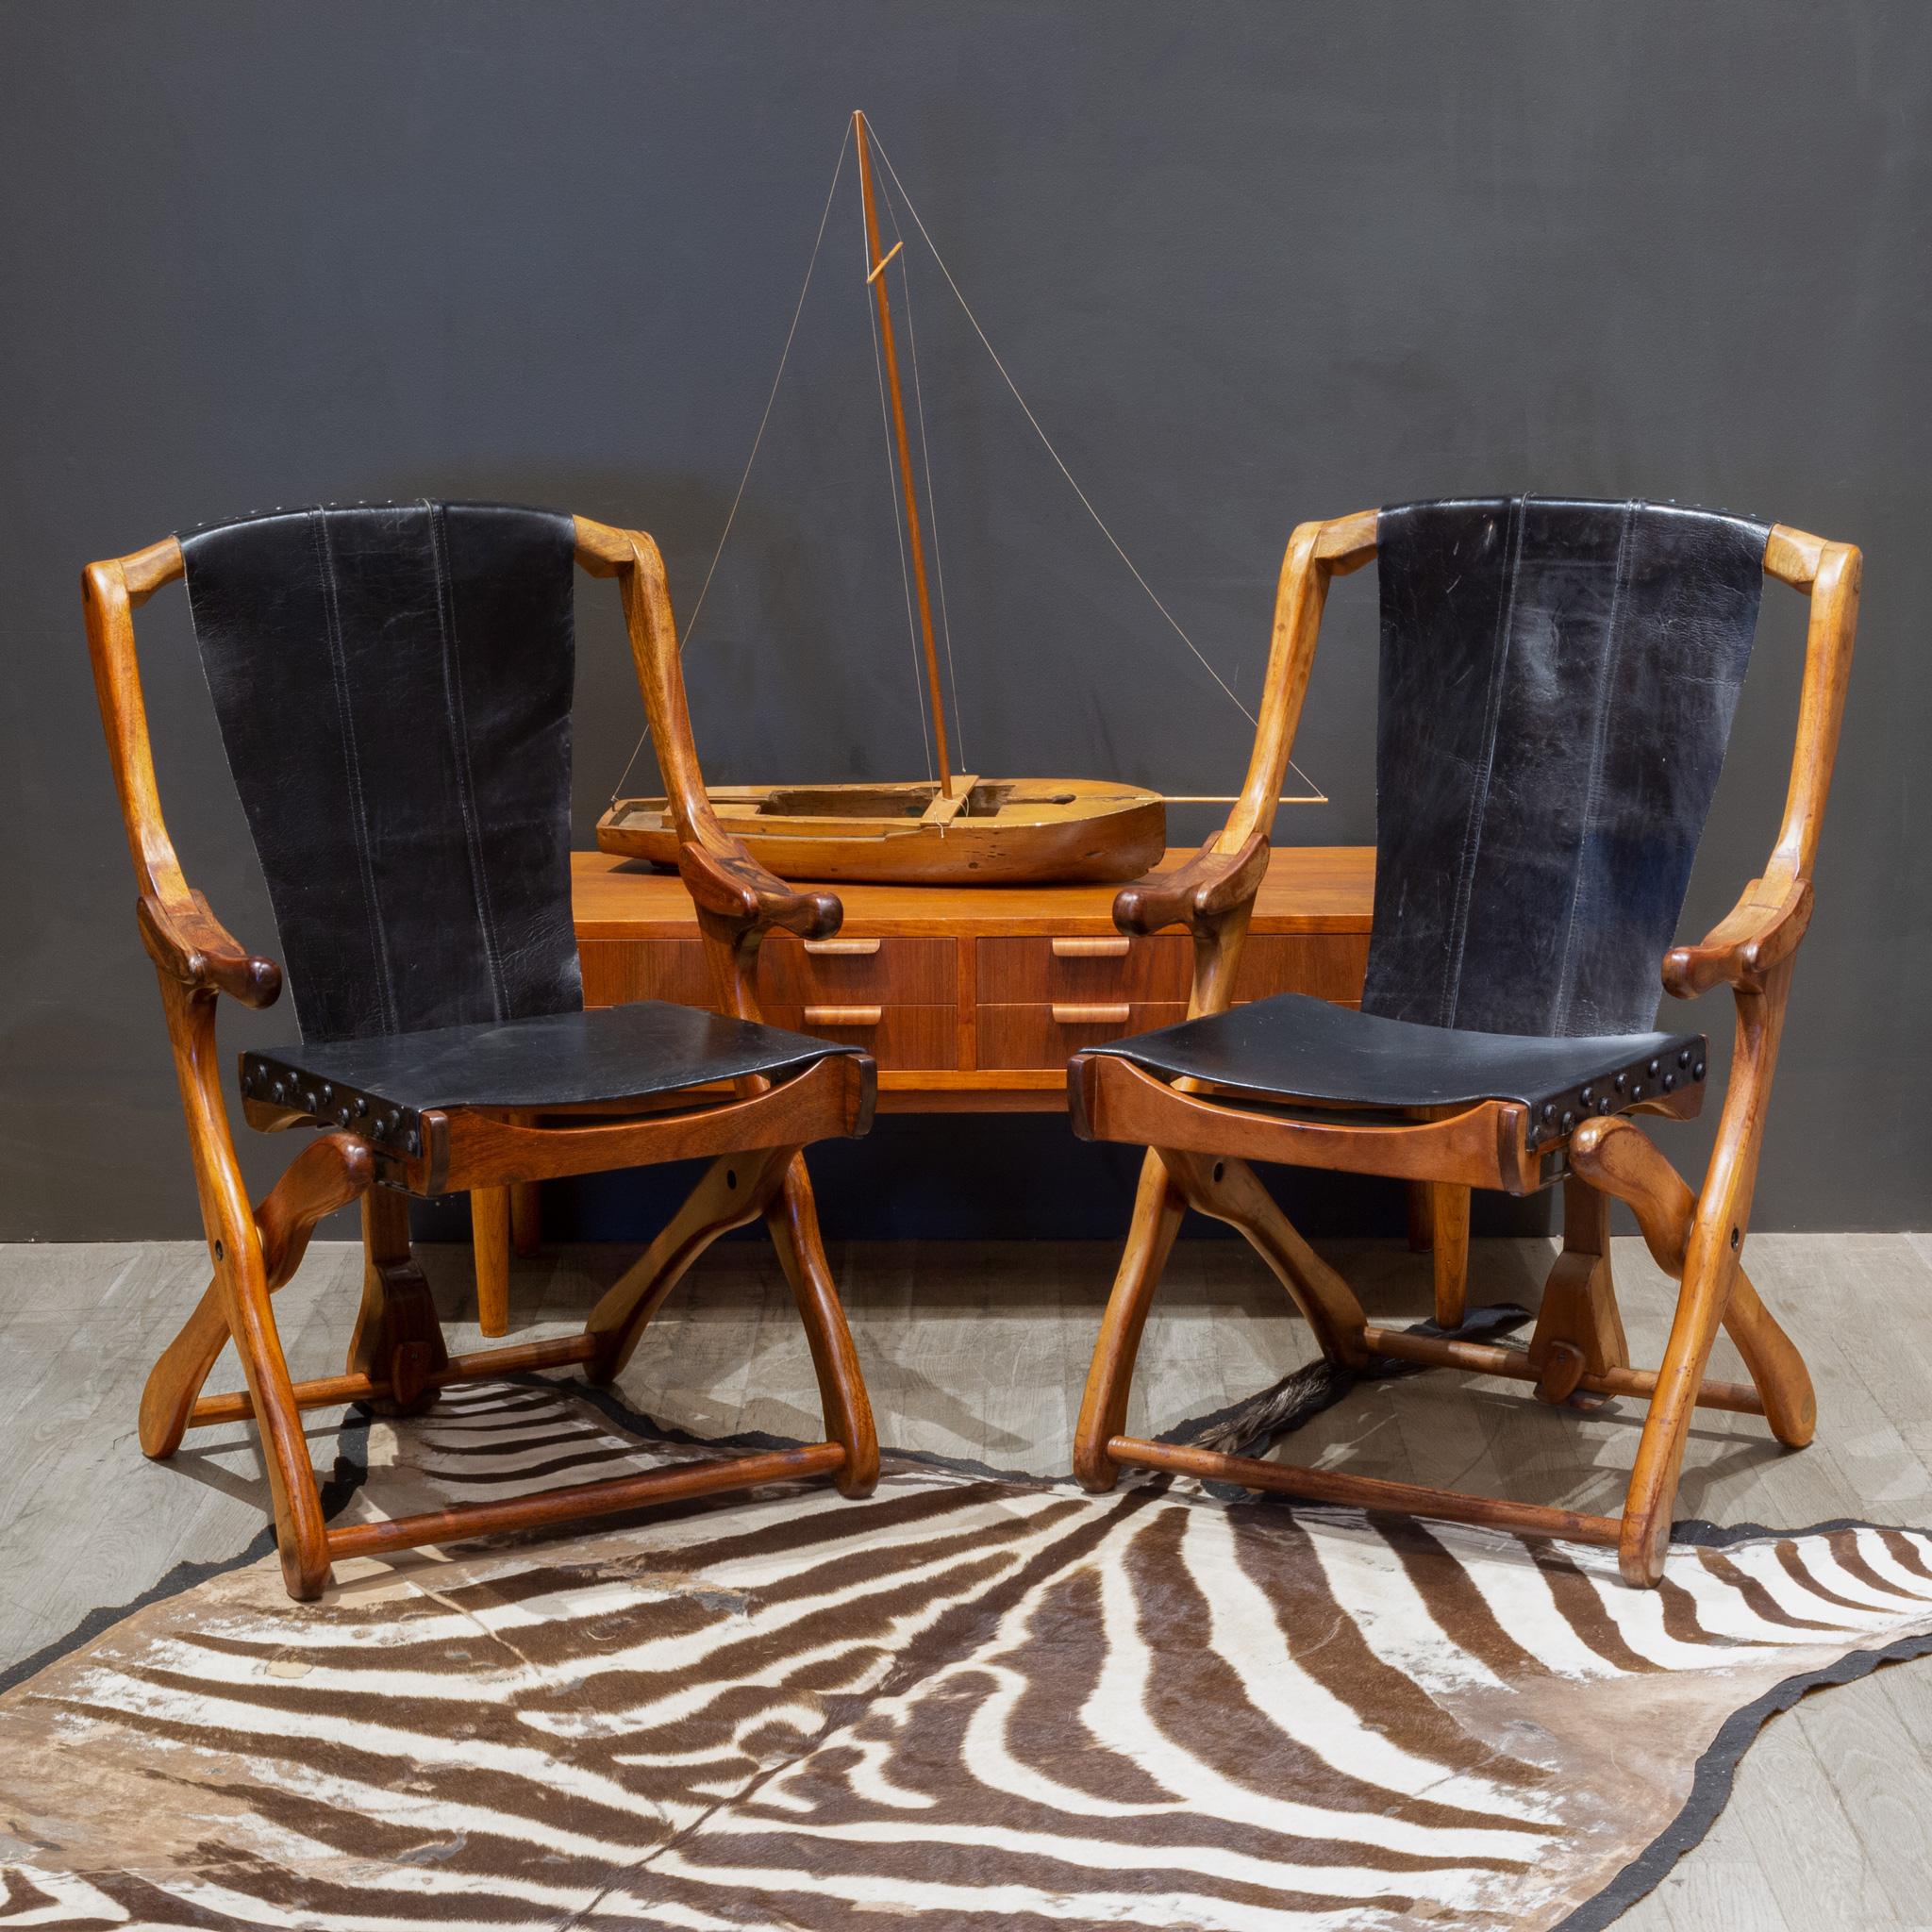 ABOUT

Price is per chair. Four available. 

Original folding lounge chairs designed by Don Shoemaker for Senal SA. The chairs are made out of Cocobolo Rosewood and upholstered in the original black leather with decorative leather pins on the top